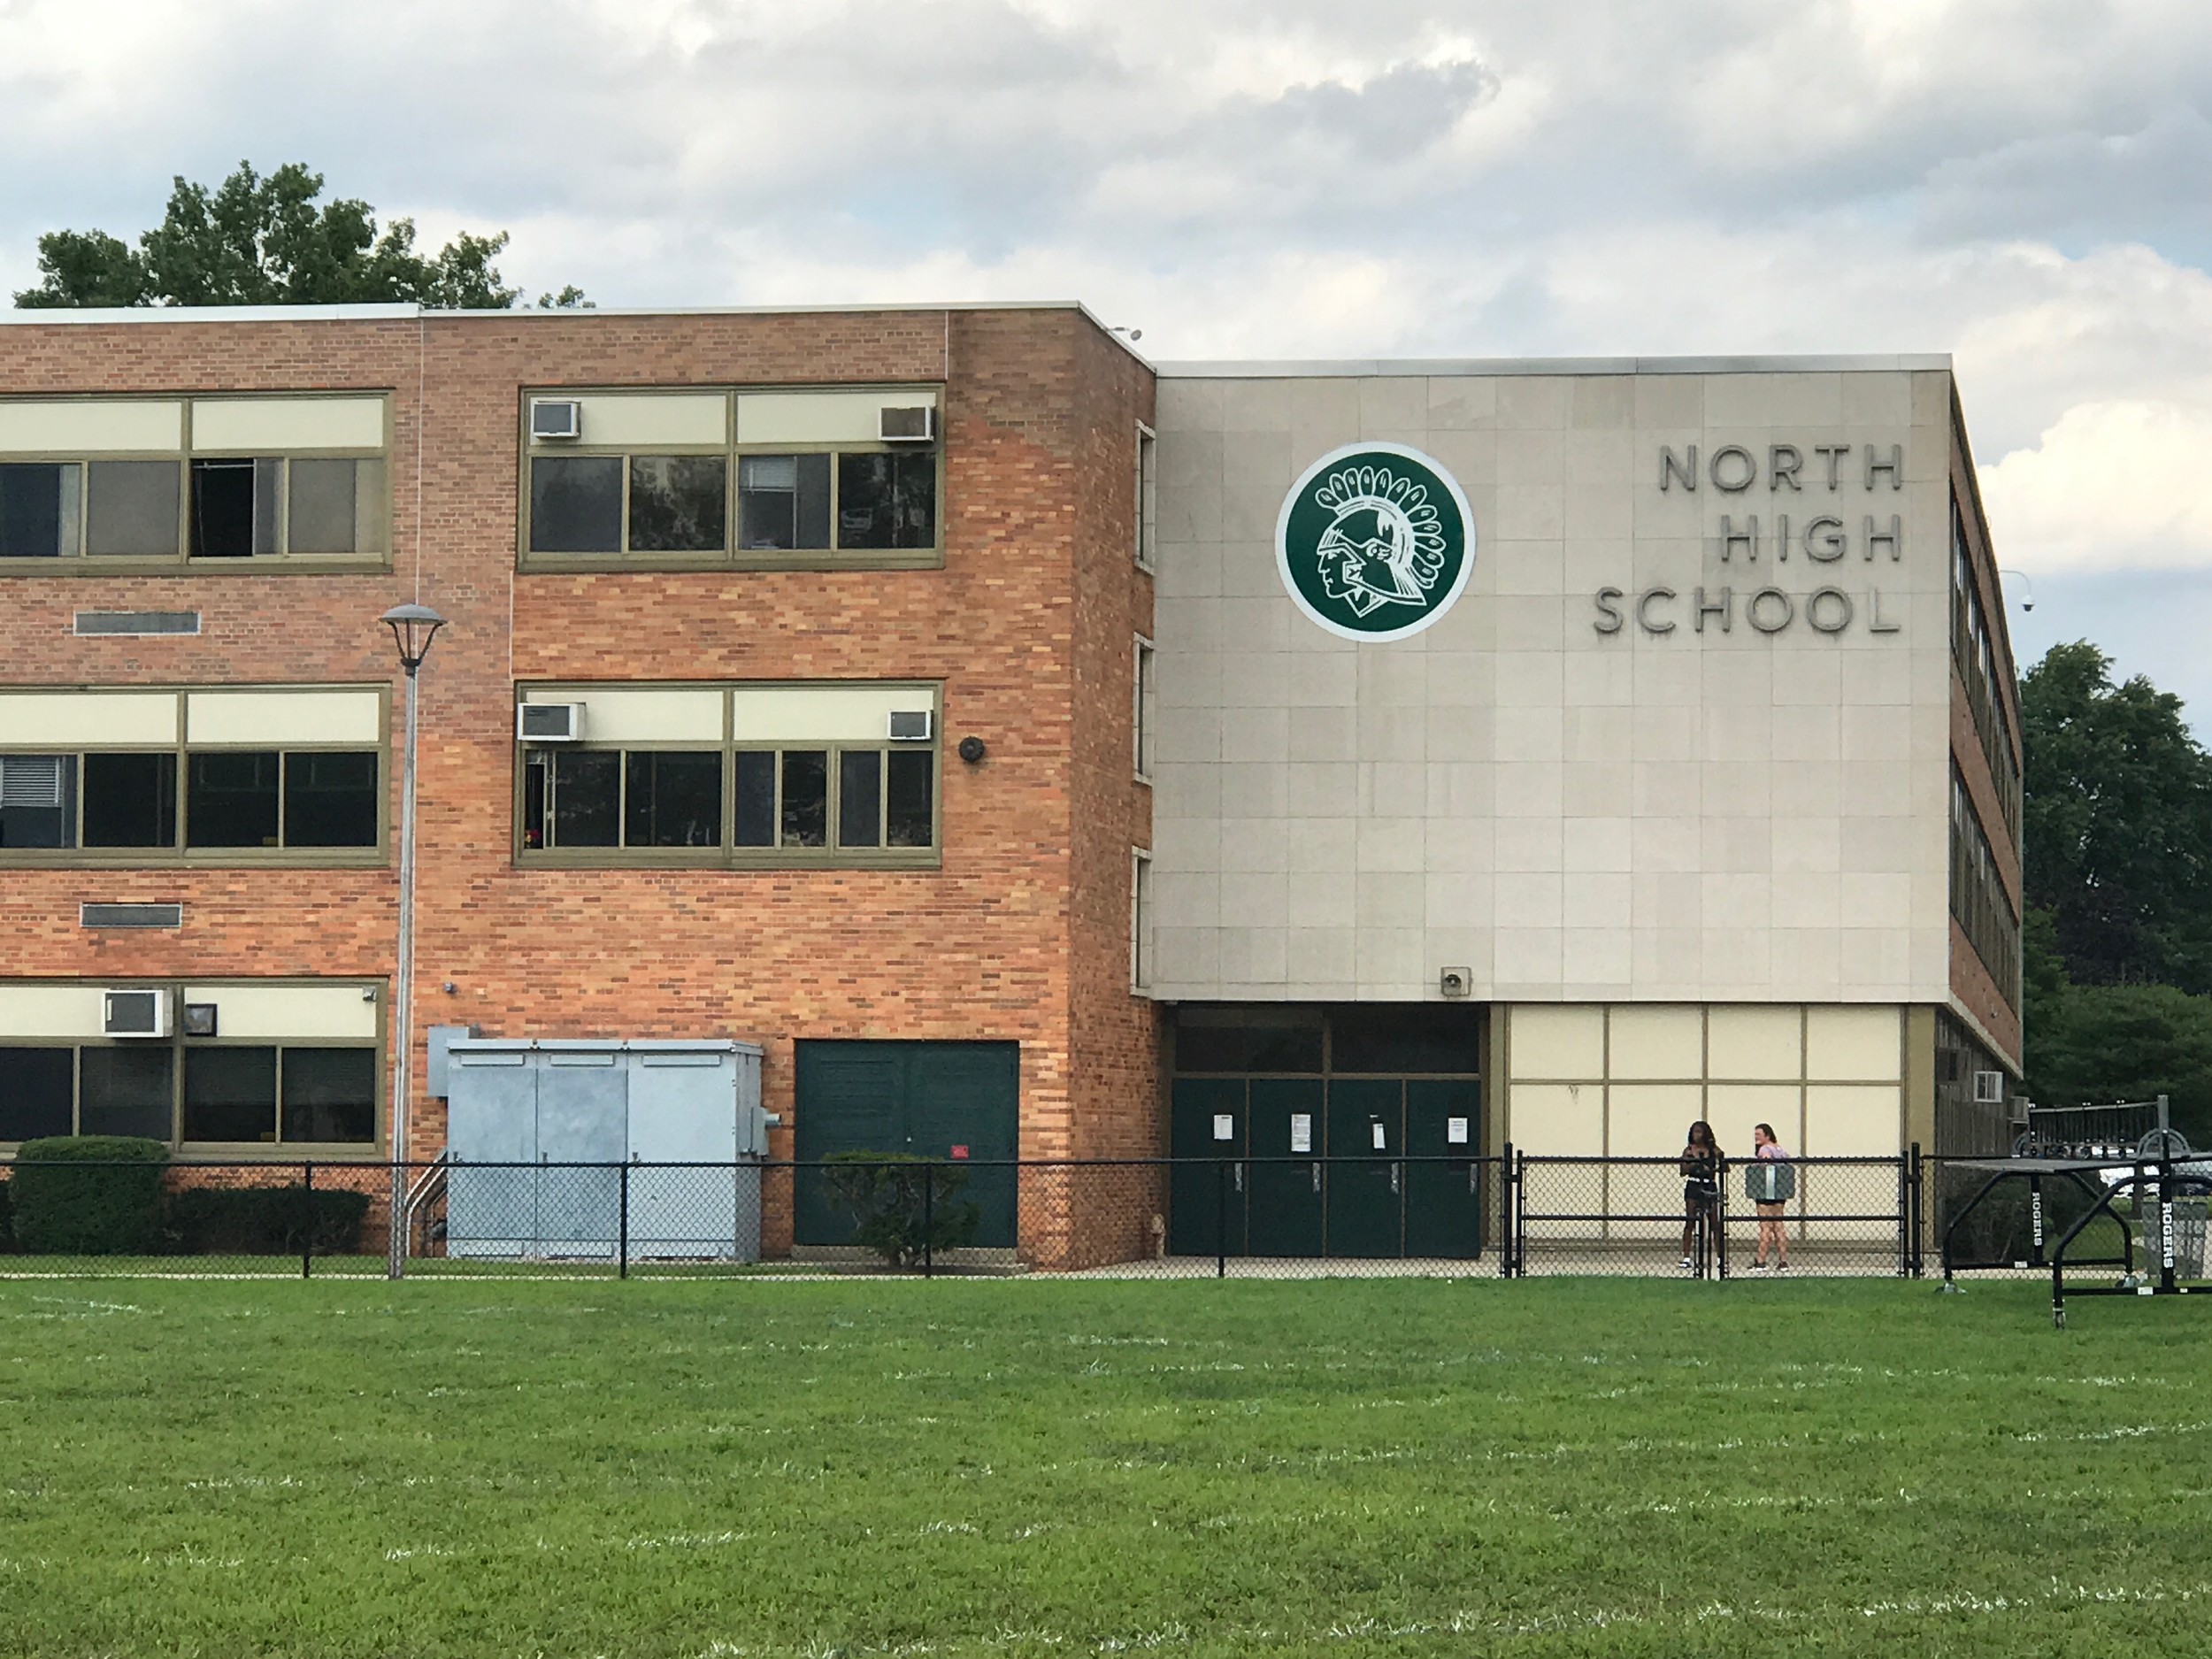 Parents and teachers submitted a petition to the Board of Education in June claiming that North High School is overcrowded.